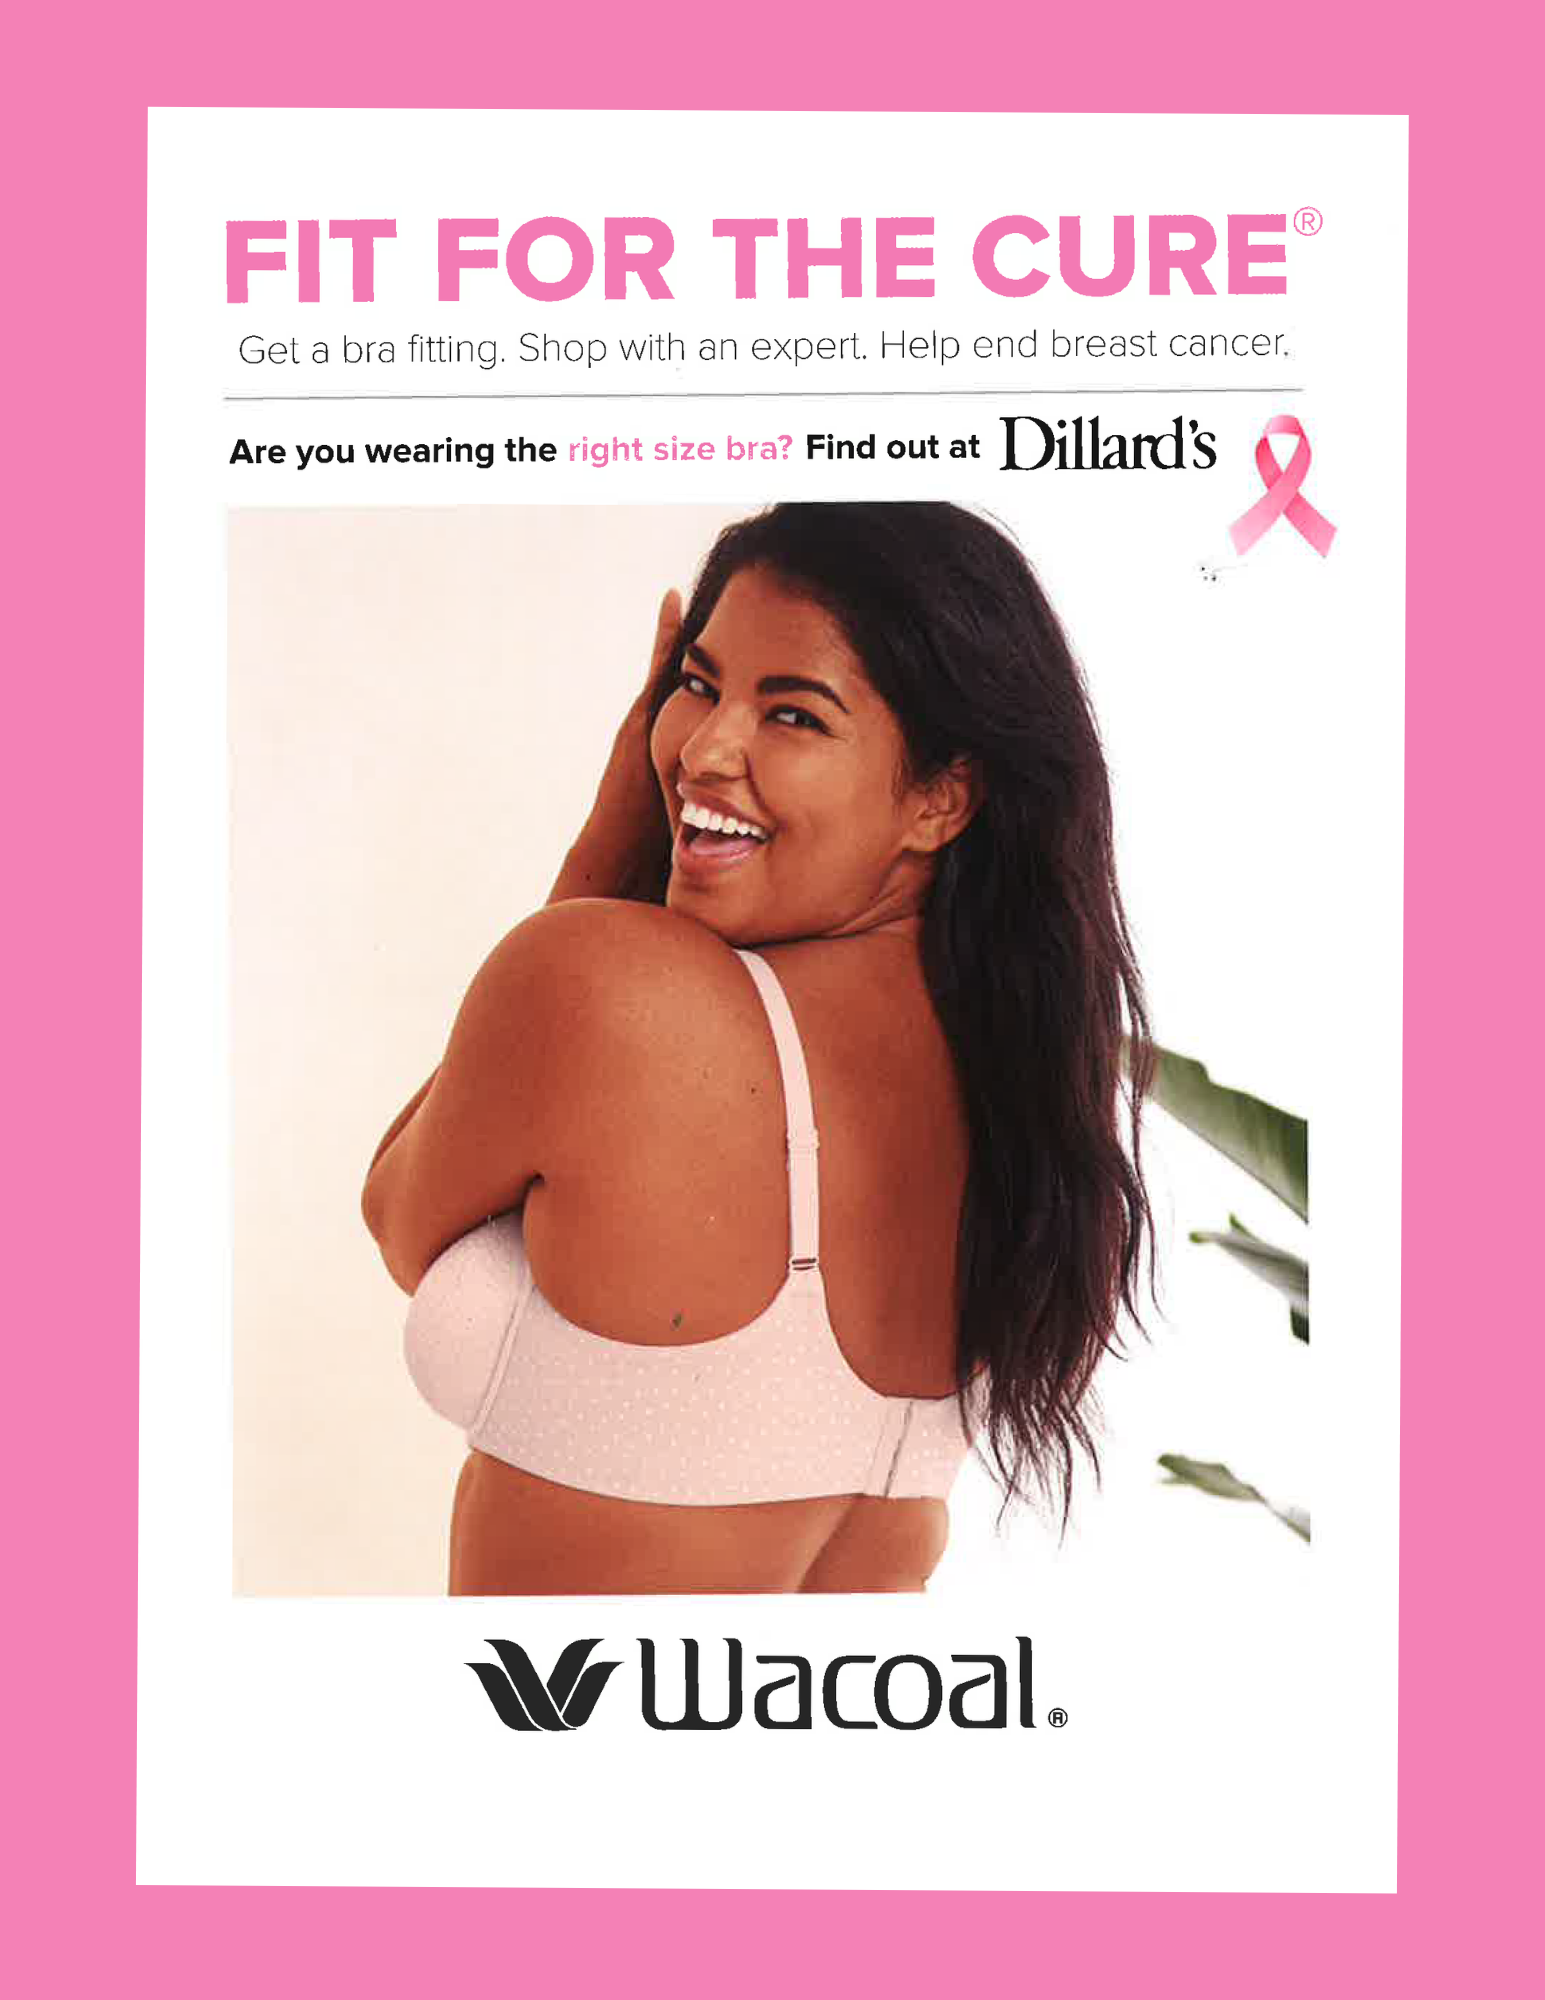 Von Maur - 🎗FIT FOR THE CURE🎗 a bra fit event to help end breast